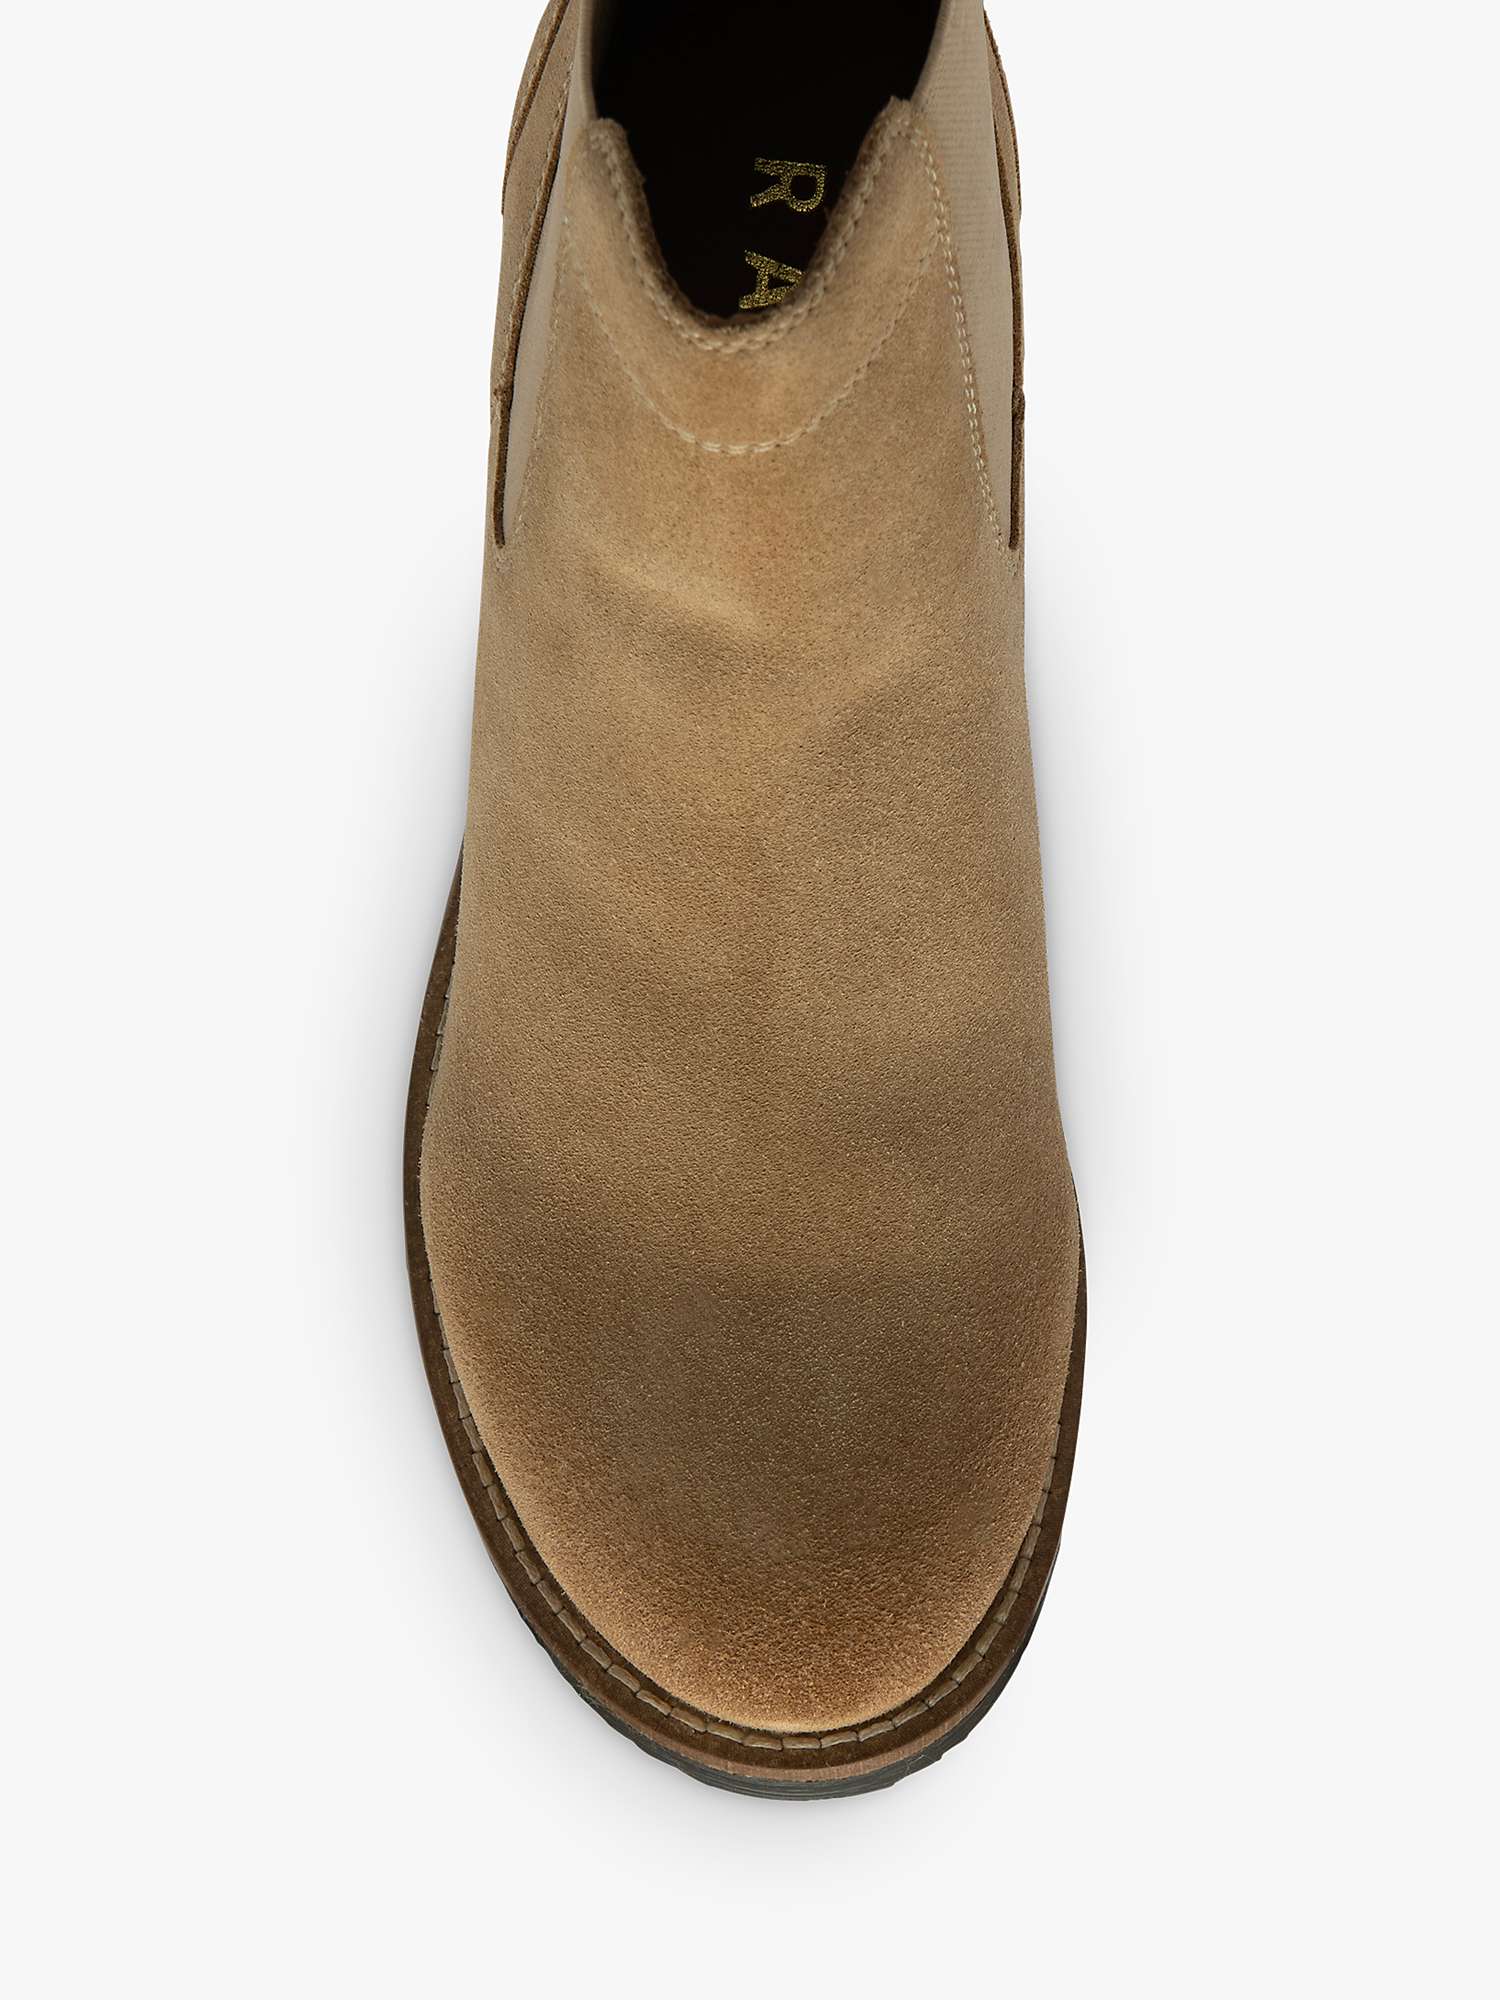 Buy Ravel Bray Heeled Suede Chelsea Boots, Sand Online at johnlewis.com